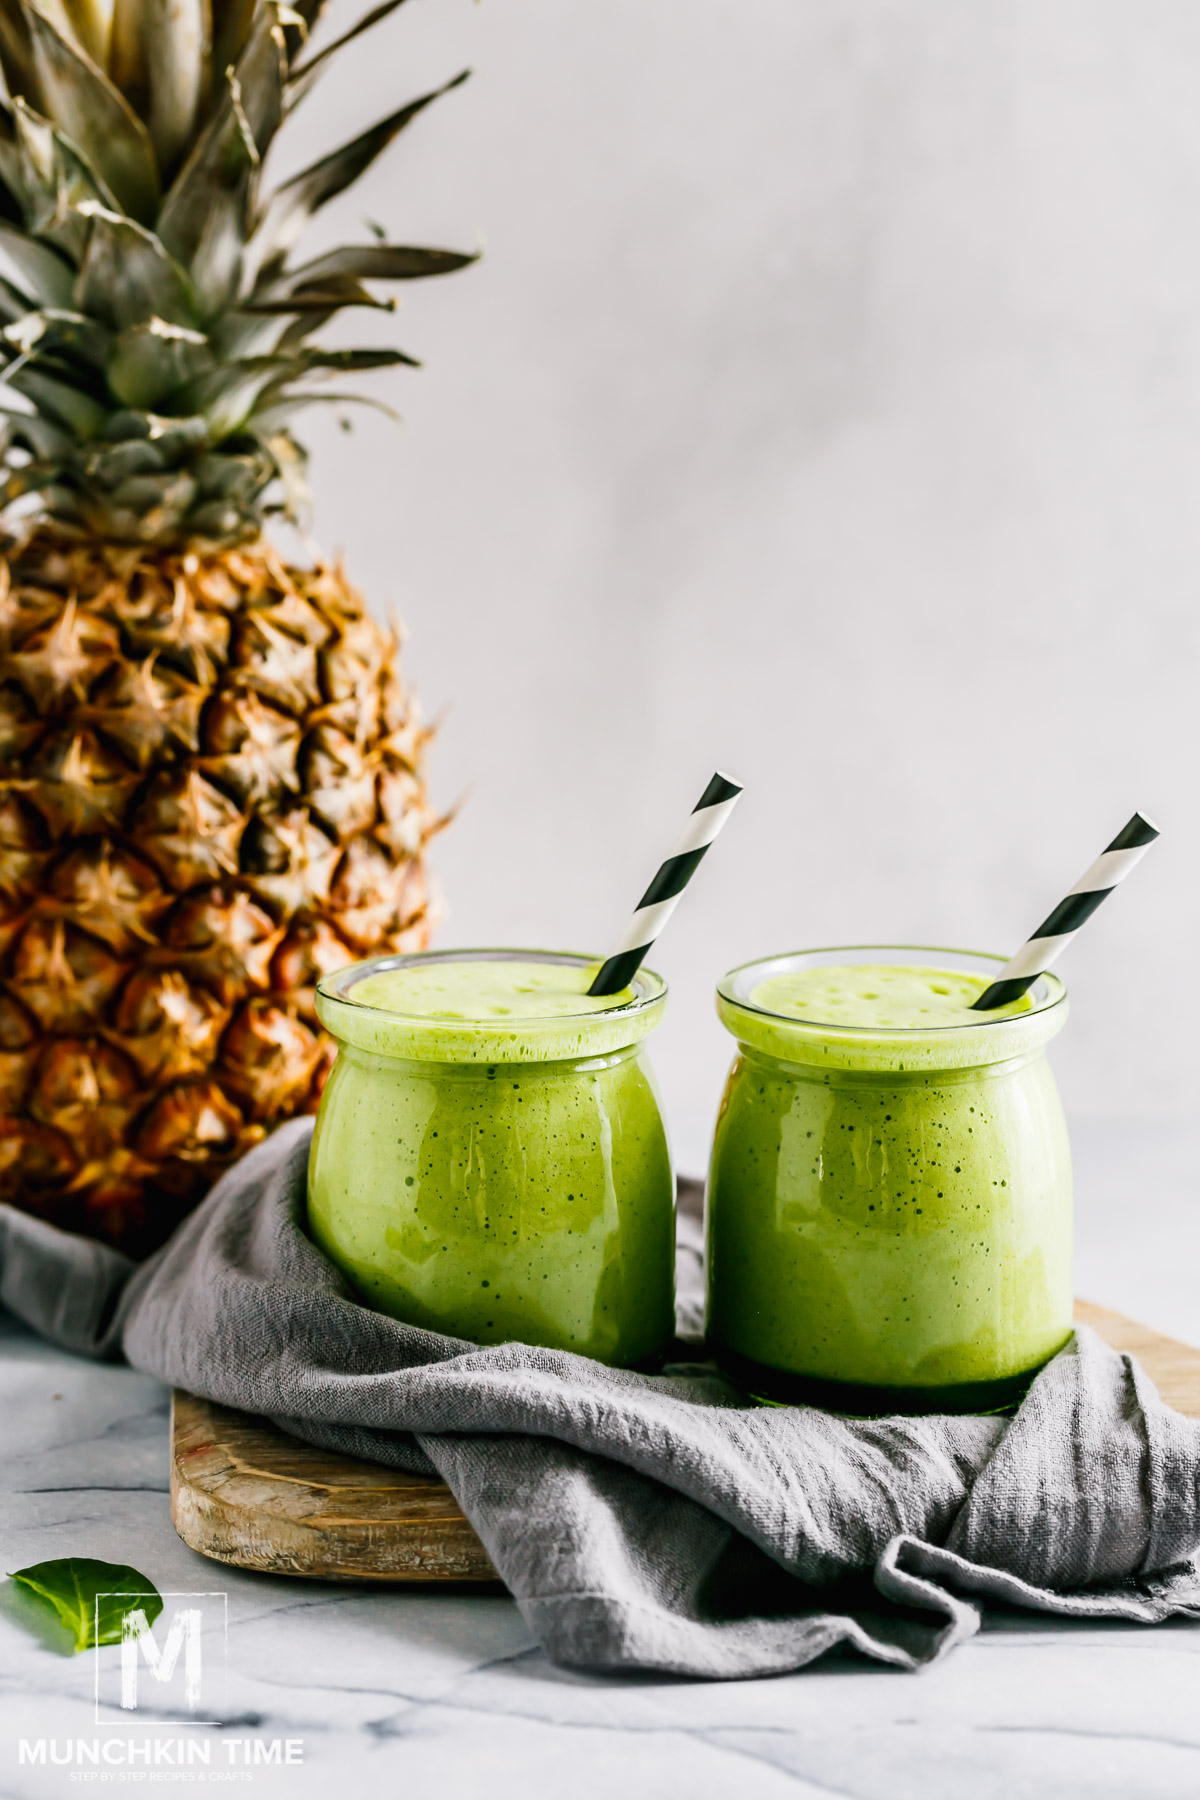 Spinach Smoothie Recipe with pineapple, melon and collagen powder.